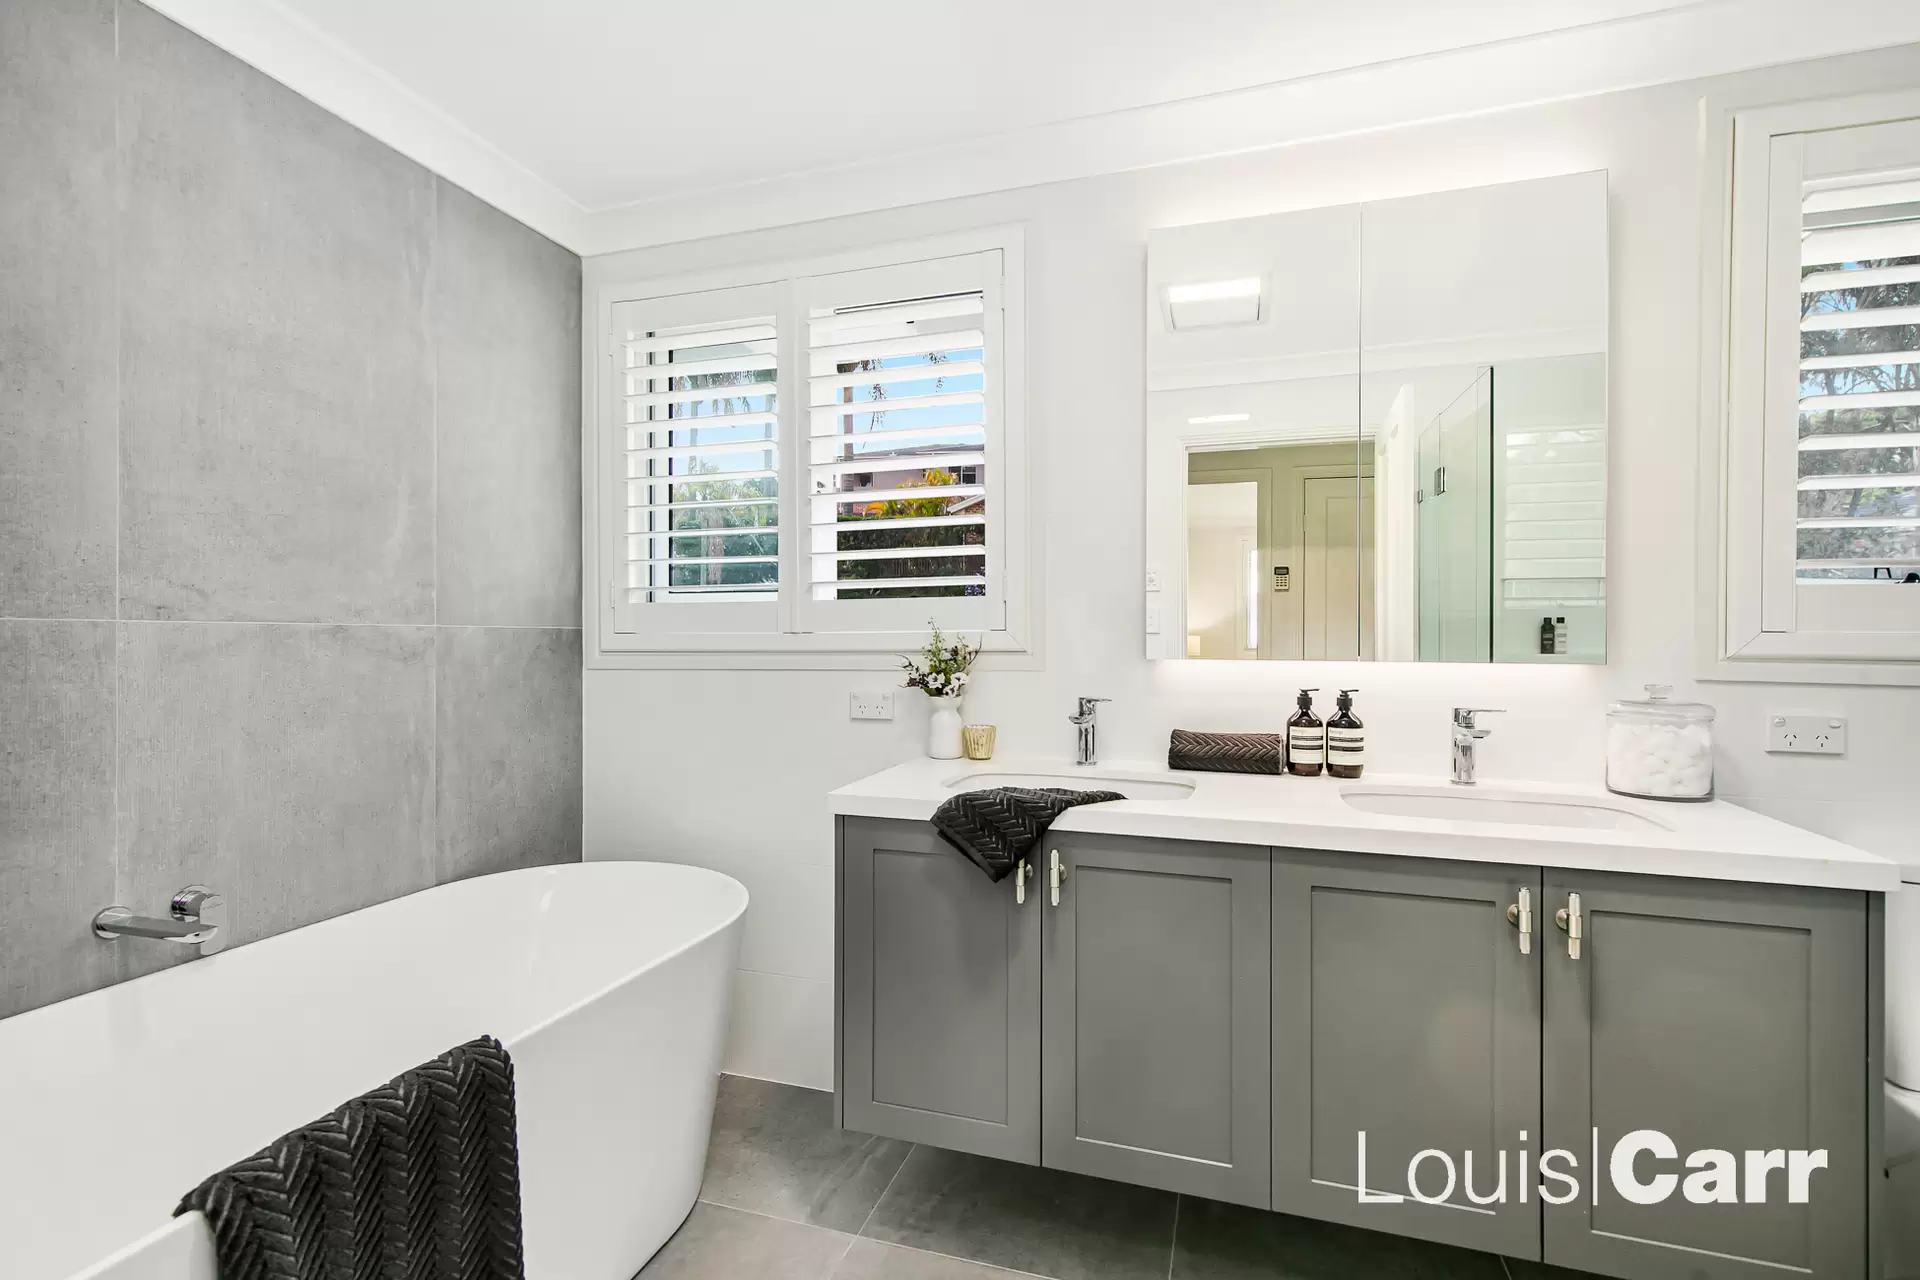 Photo #15: 38 Coonara Avenue, West Pennant Hills - Sold by Louis Carr Real Estate